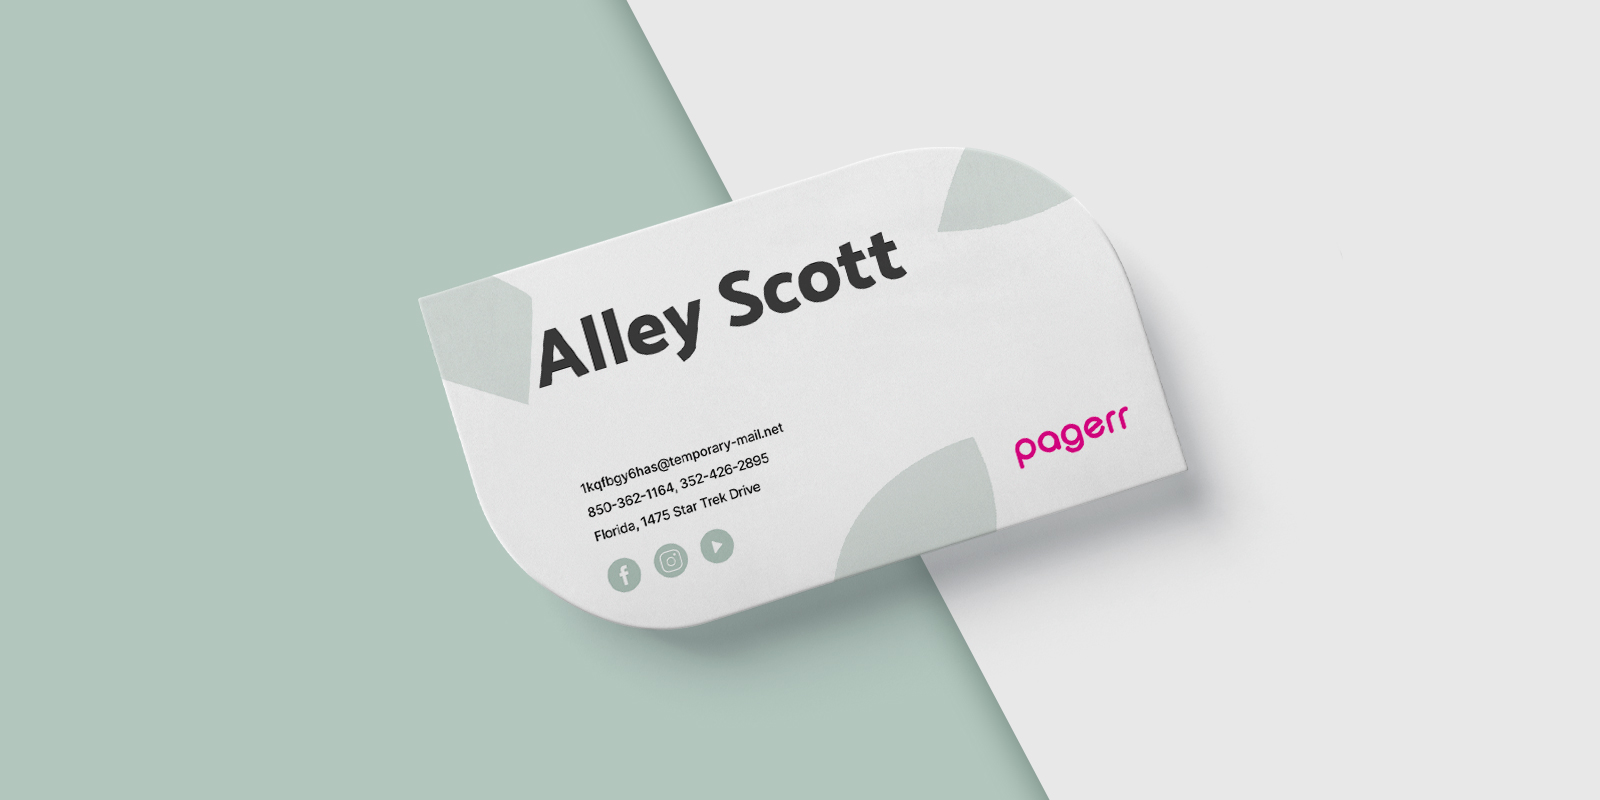 Special shape business cards in Adelaide - Print with Pagerr